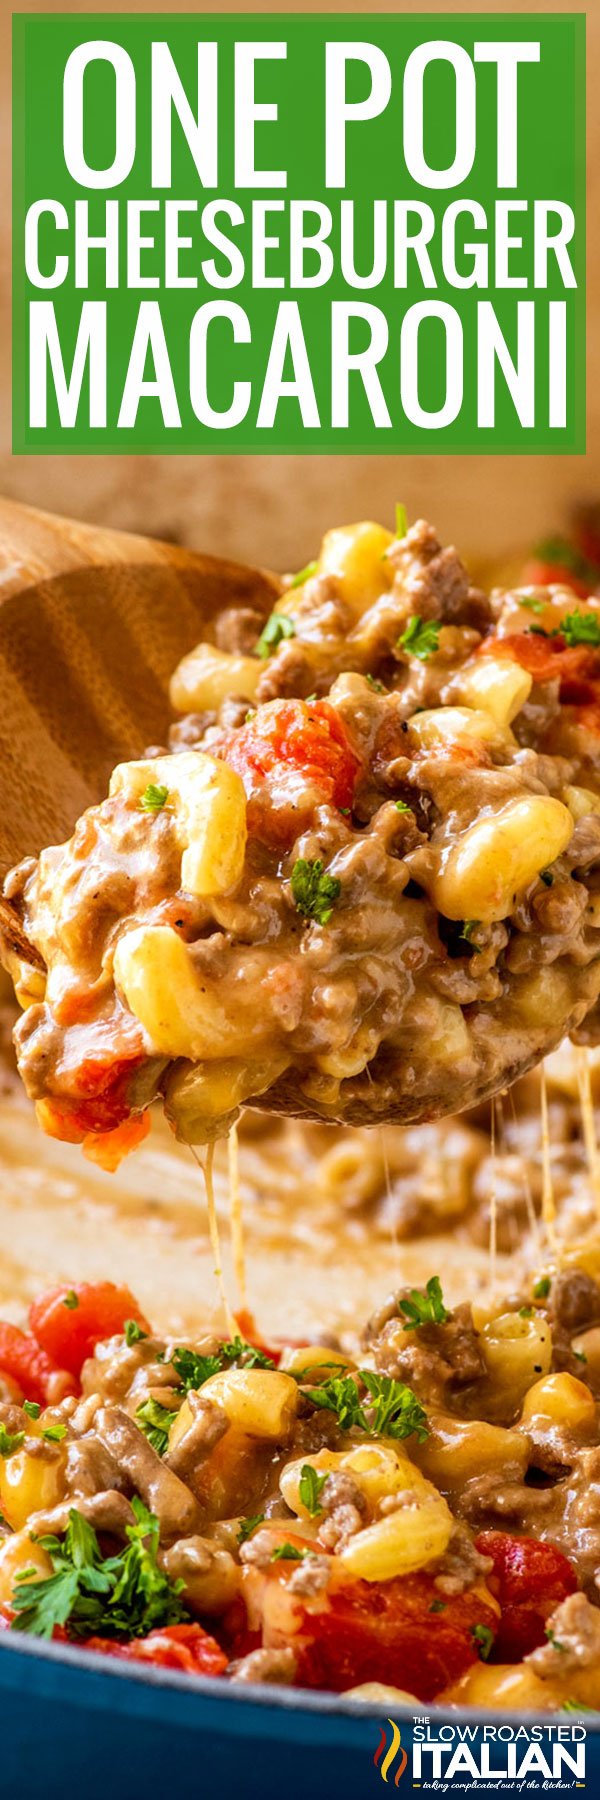 titled image (and shown): One Pot Cheeseburger Macaroni